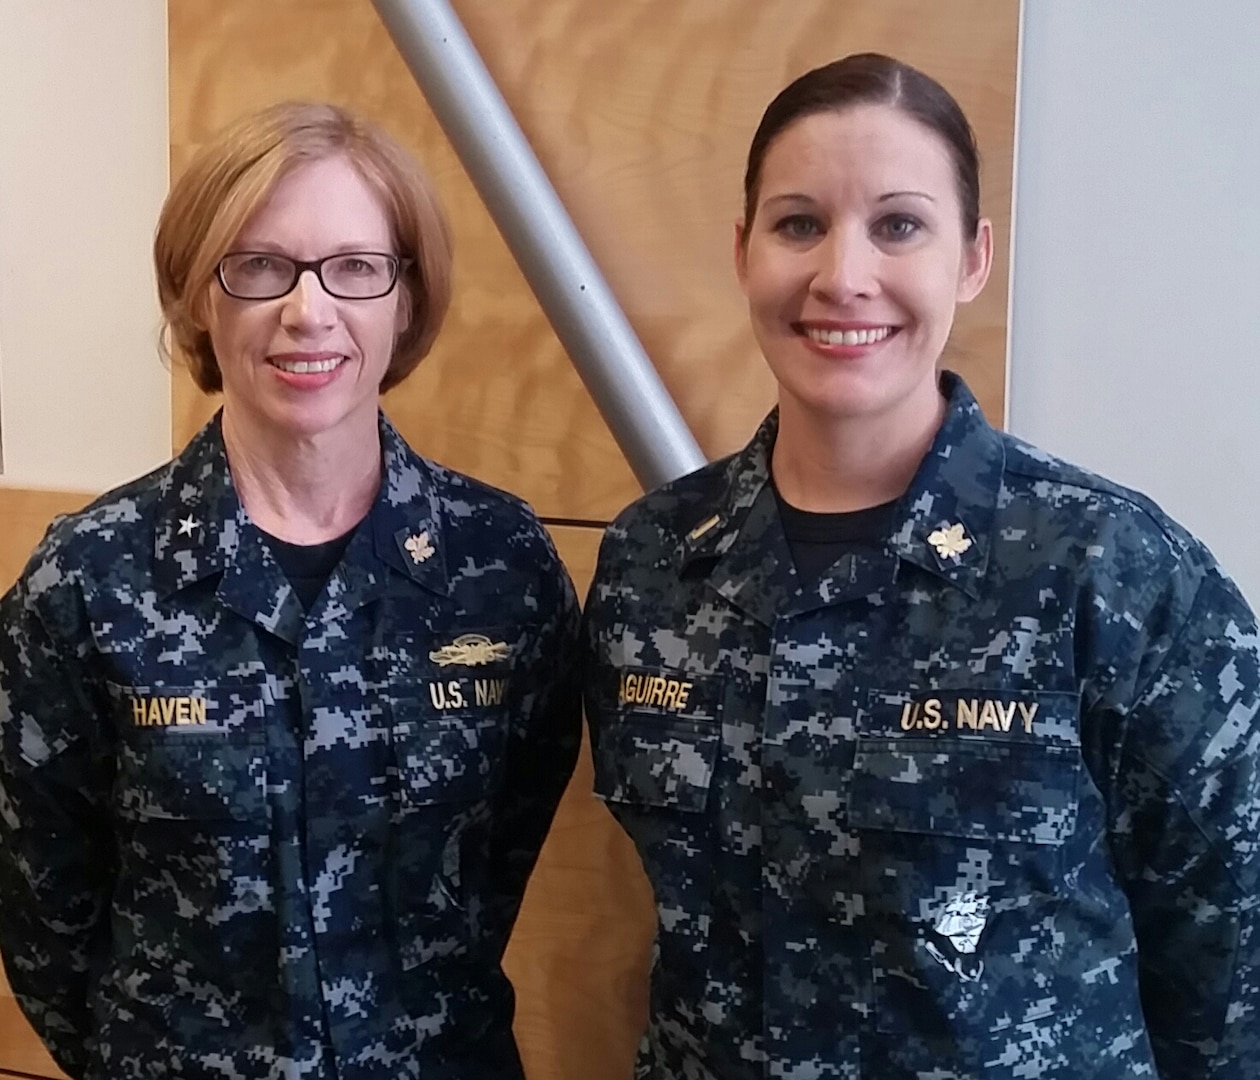 Navy Rear Adm. Deborah Haven, Defense Contract Management Agency International commander, and Navy Lt. j.g. Amy Aguirre (pictured as an Ensign), at Operational Contract Support Joint Exercise 2015 in Fort Bliss, Texas. Aguirre, a Navy reservist assigned to DCMA for the exercise, was in the Contingency Contract Administration Services cell at OCSJX-15.